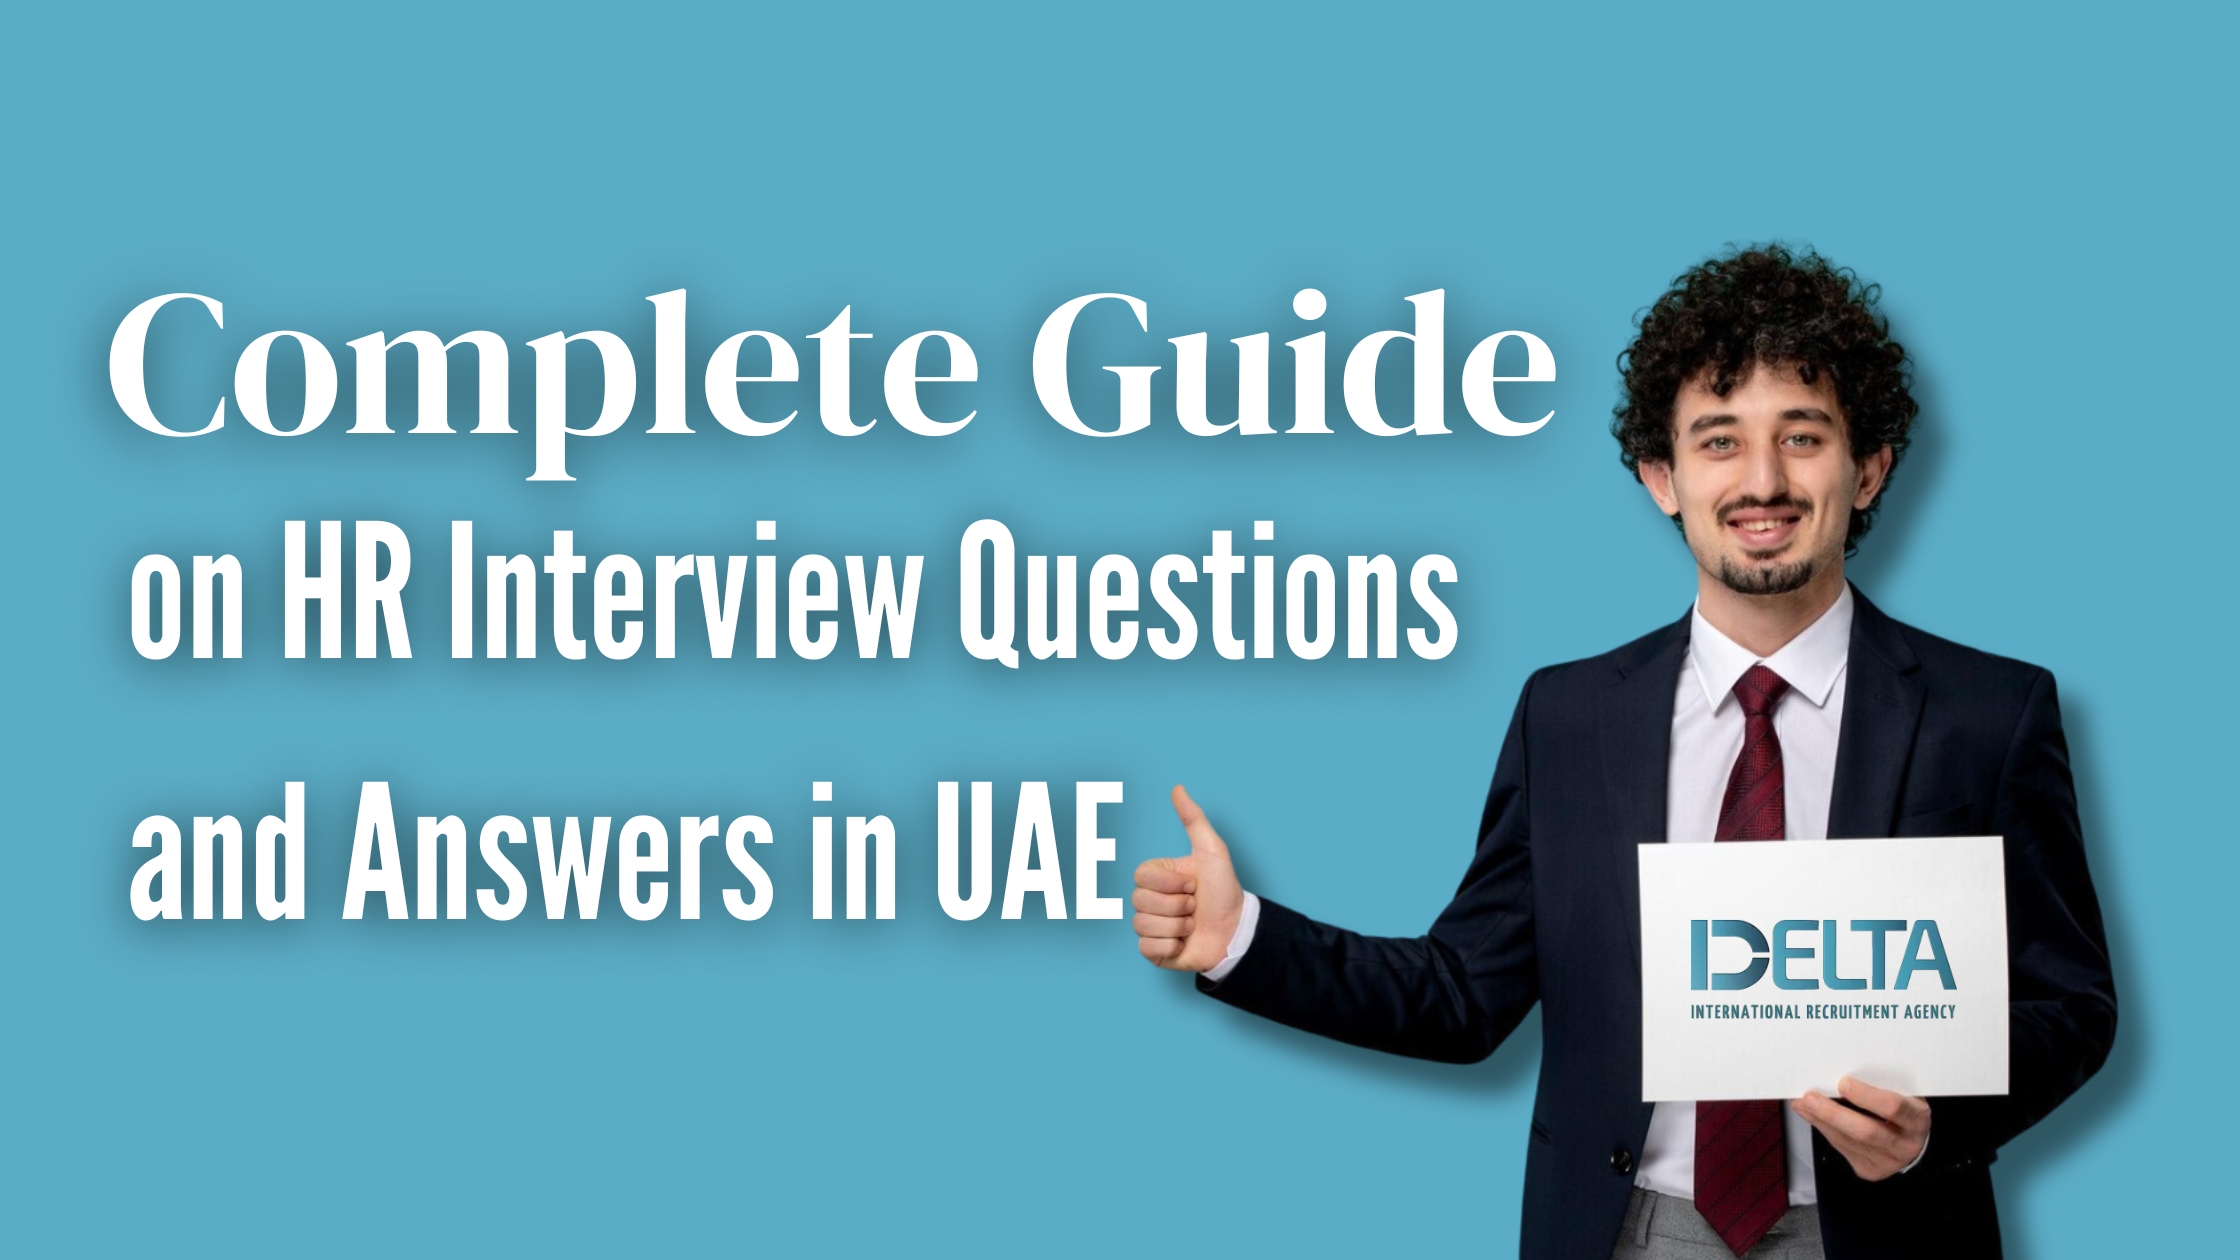 Complete Guide on HR Interview Questions and Answers in UAE